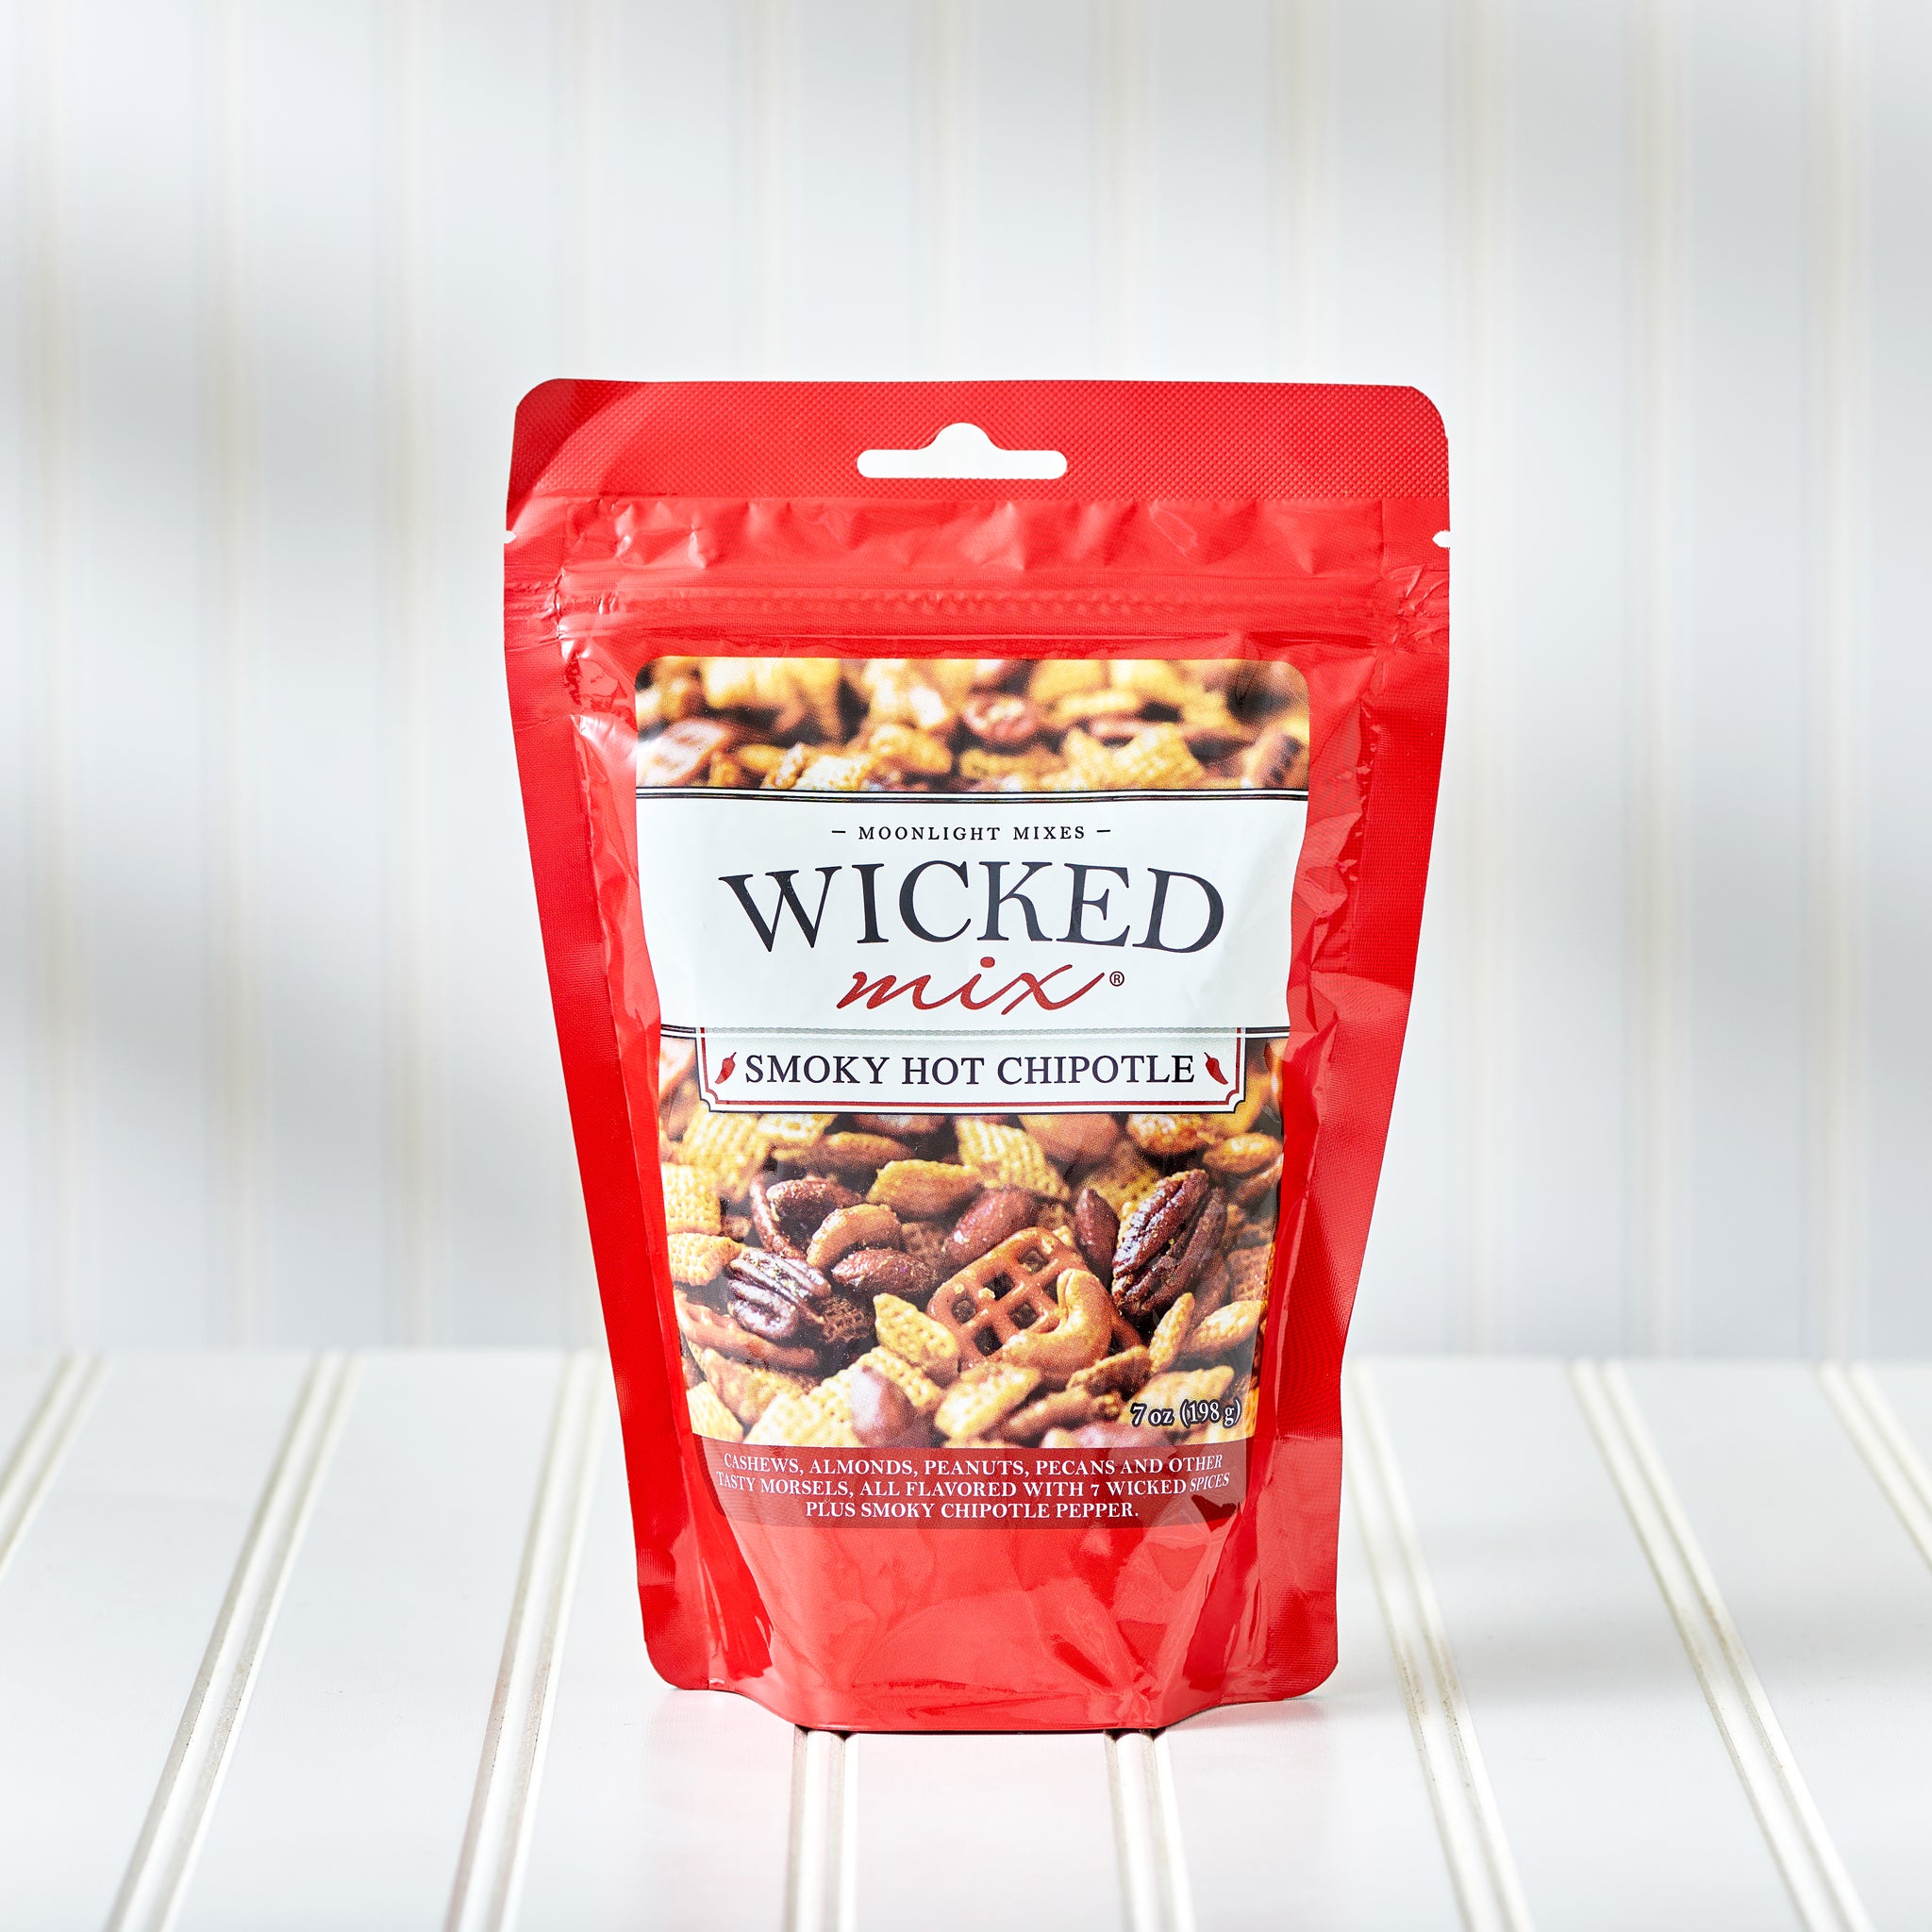 Wicked Mix® Smoky Hot Chipotle